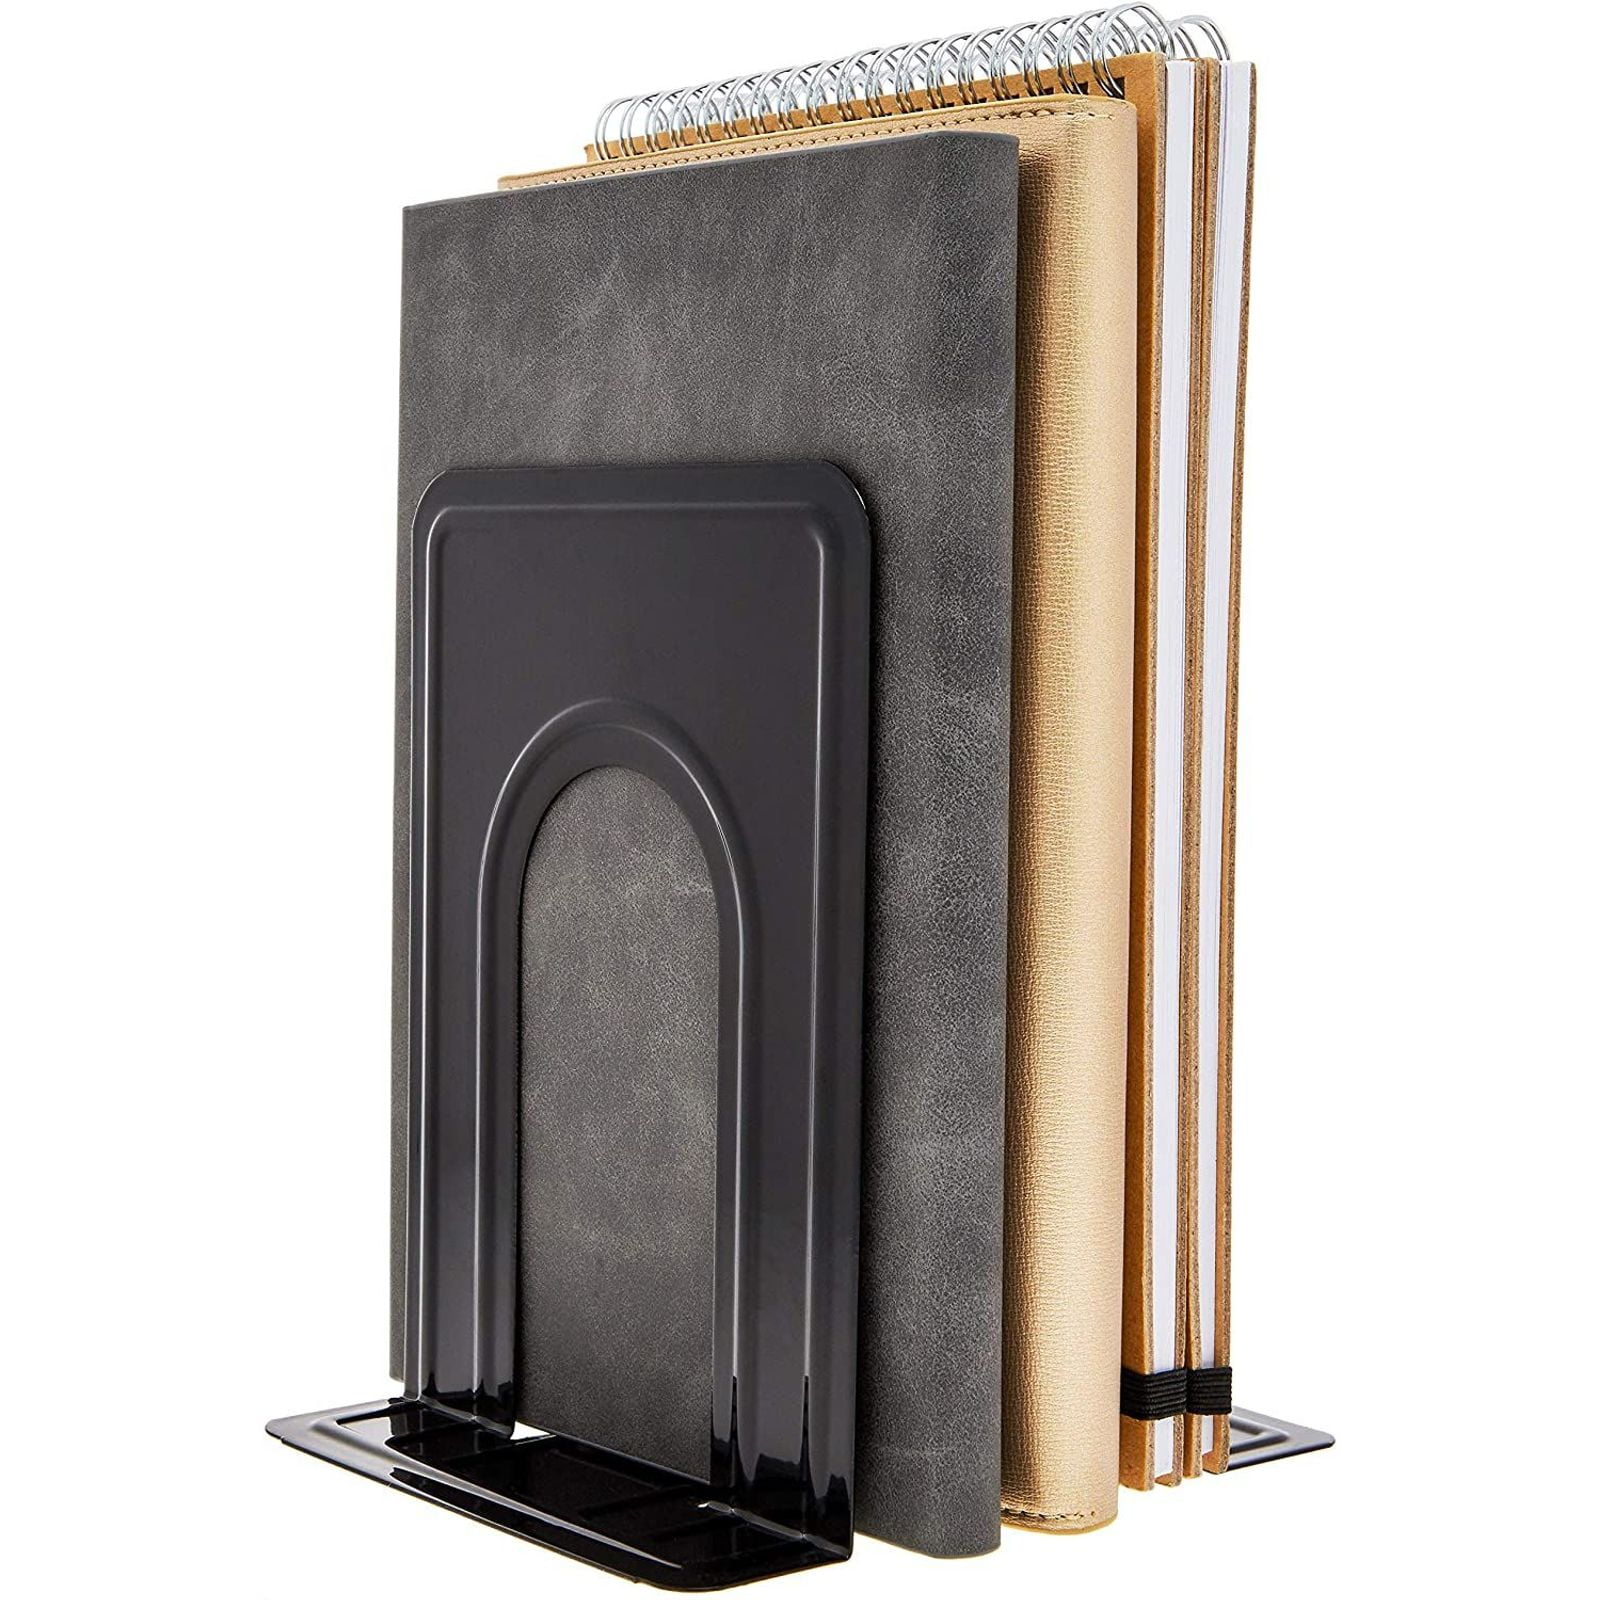 Black Book 6.7 x 5.7 x 5.0 In Bookends Heavy Duty Metal Book Ends for Shelves 